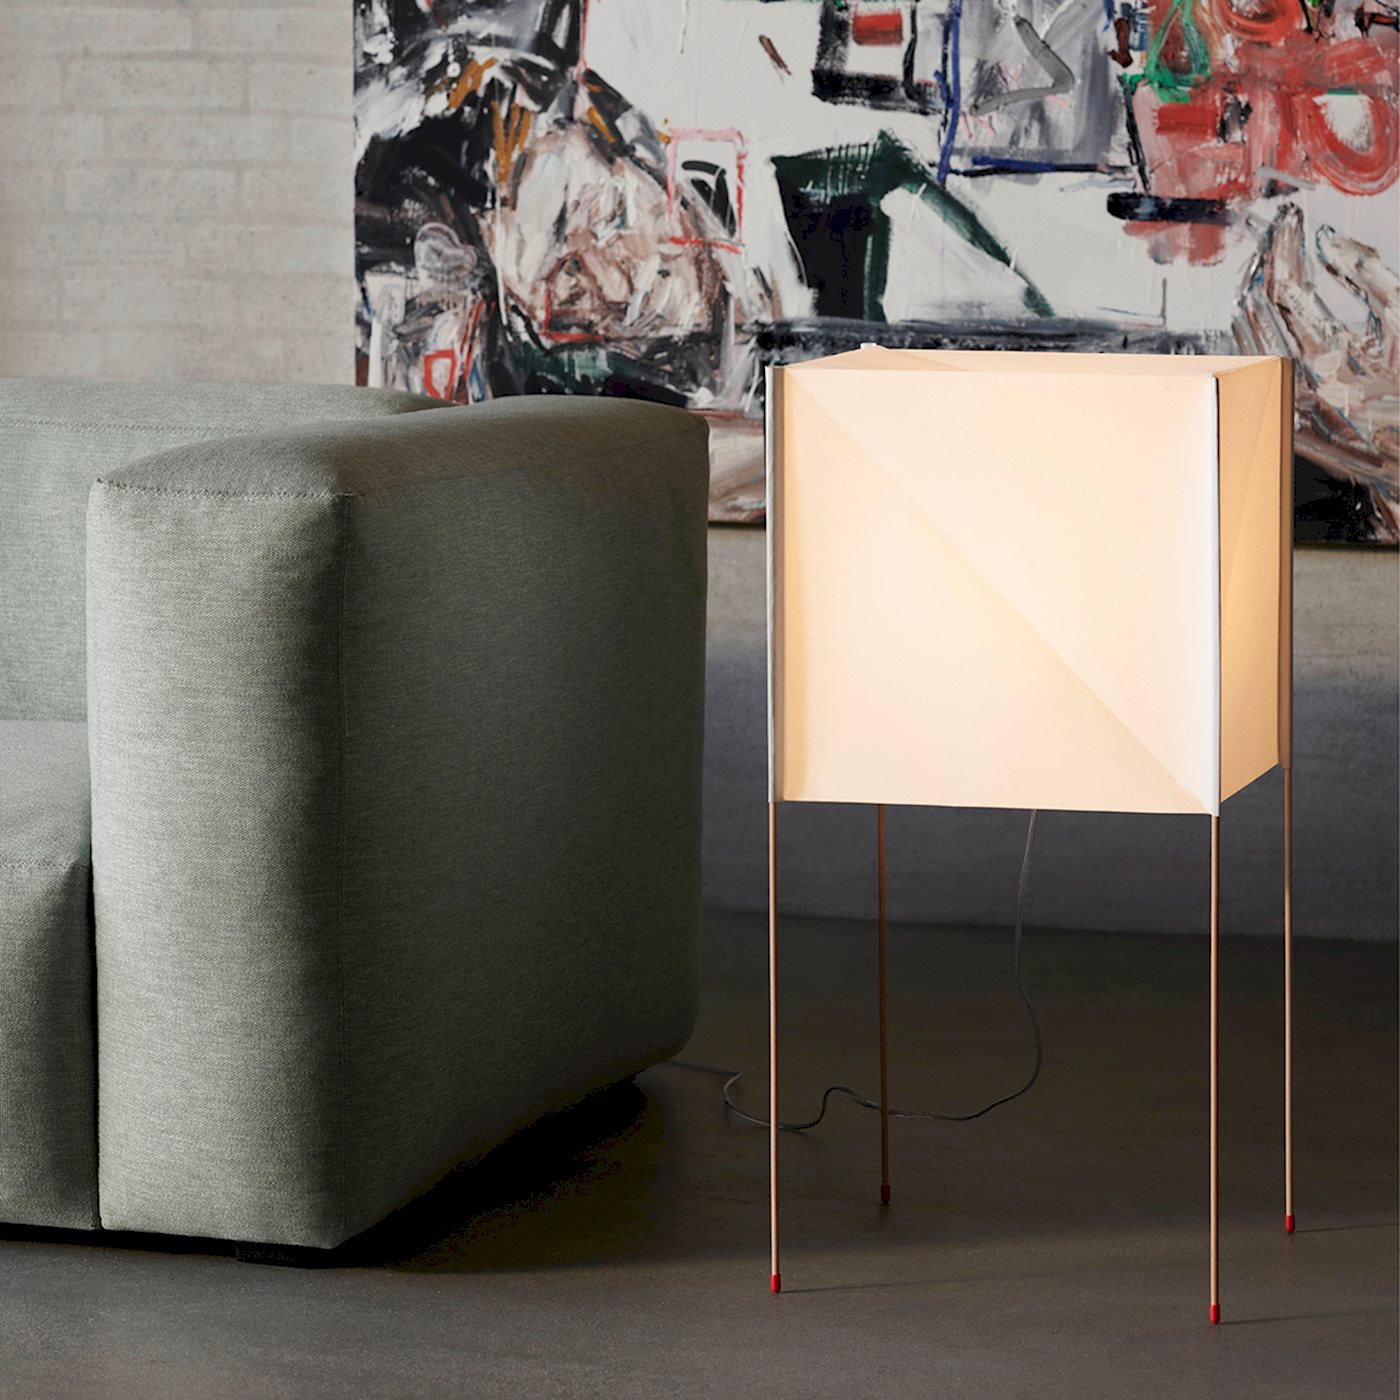 Load image into Gallery viewer, PAPER CUBE FLOOR LAMP - ECOPET PAPER
